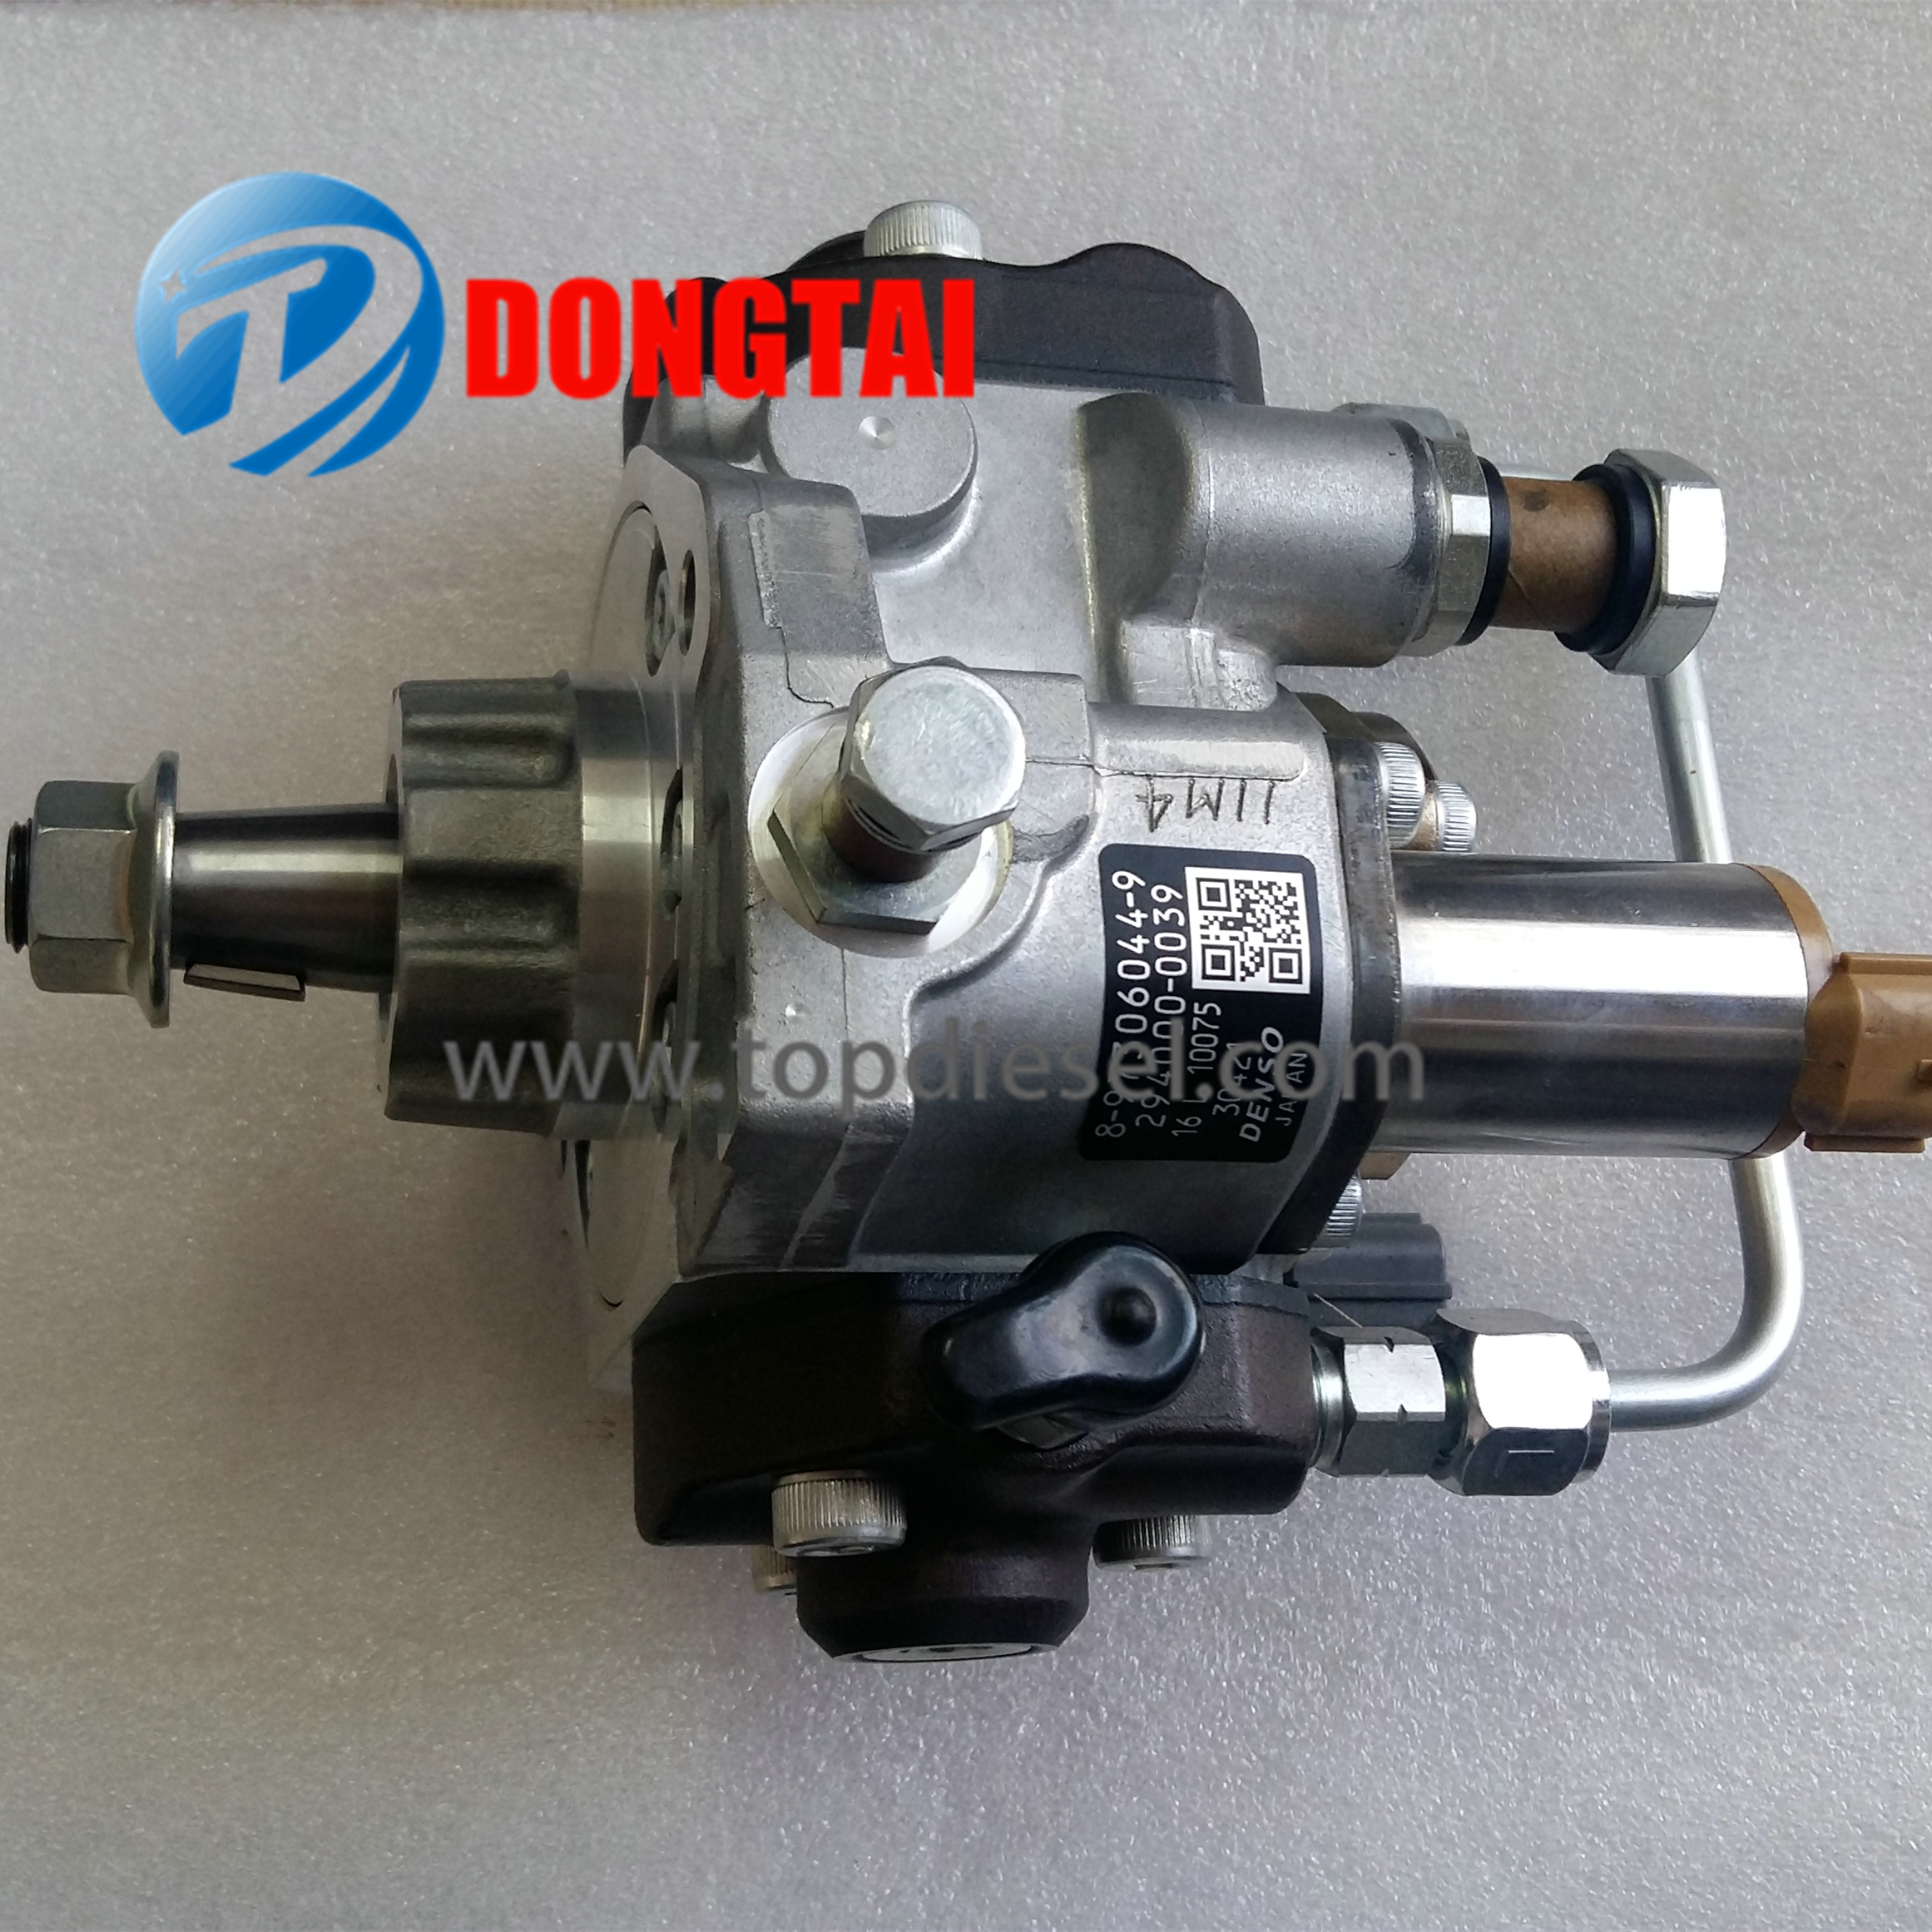 China Supplier 产品关键词： - 294000-0040 – Dongtai